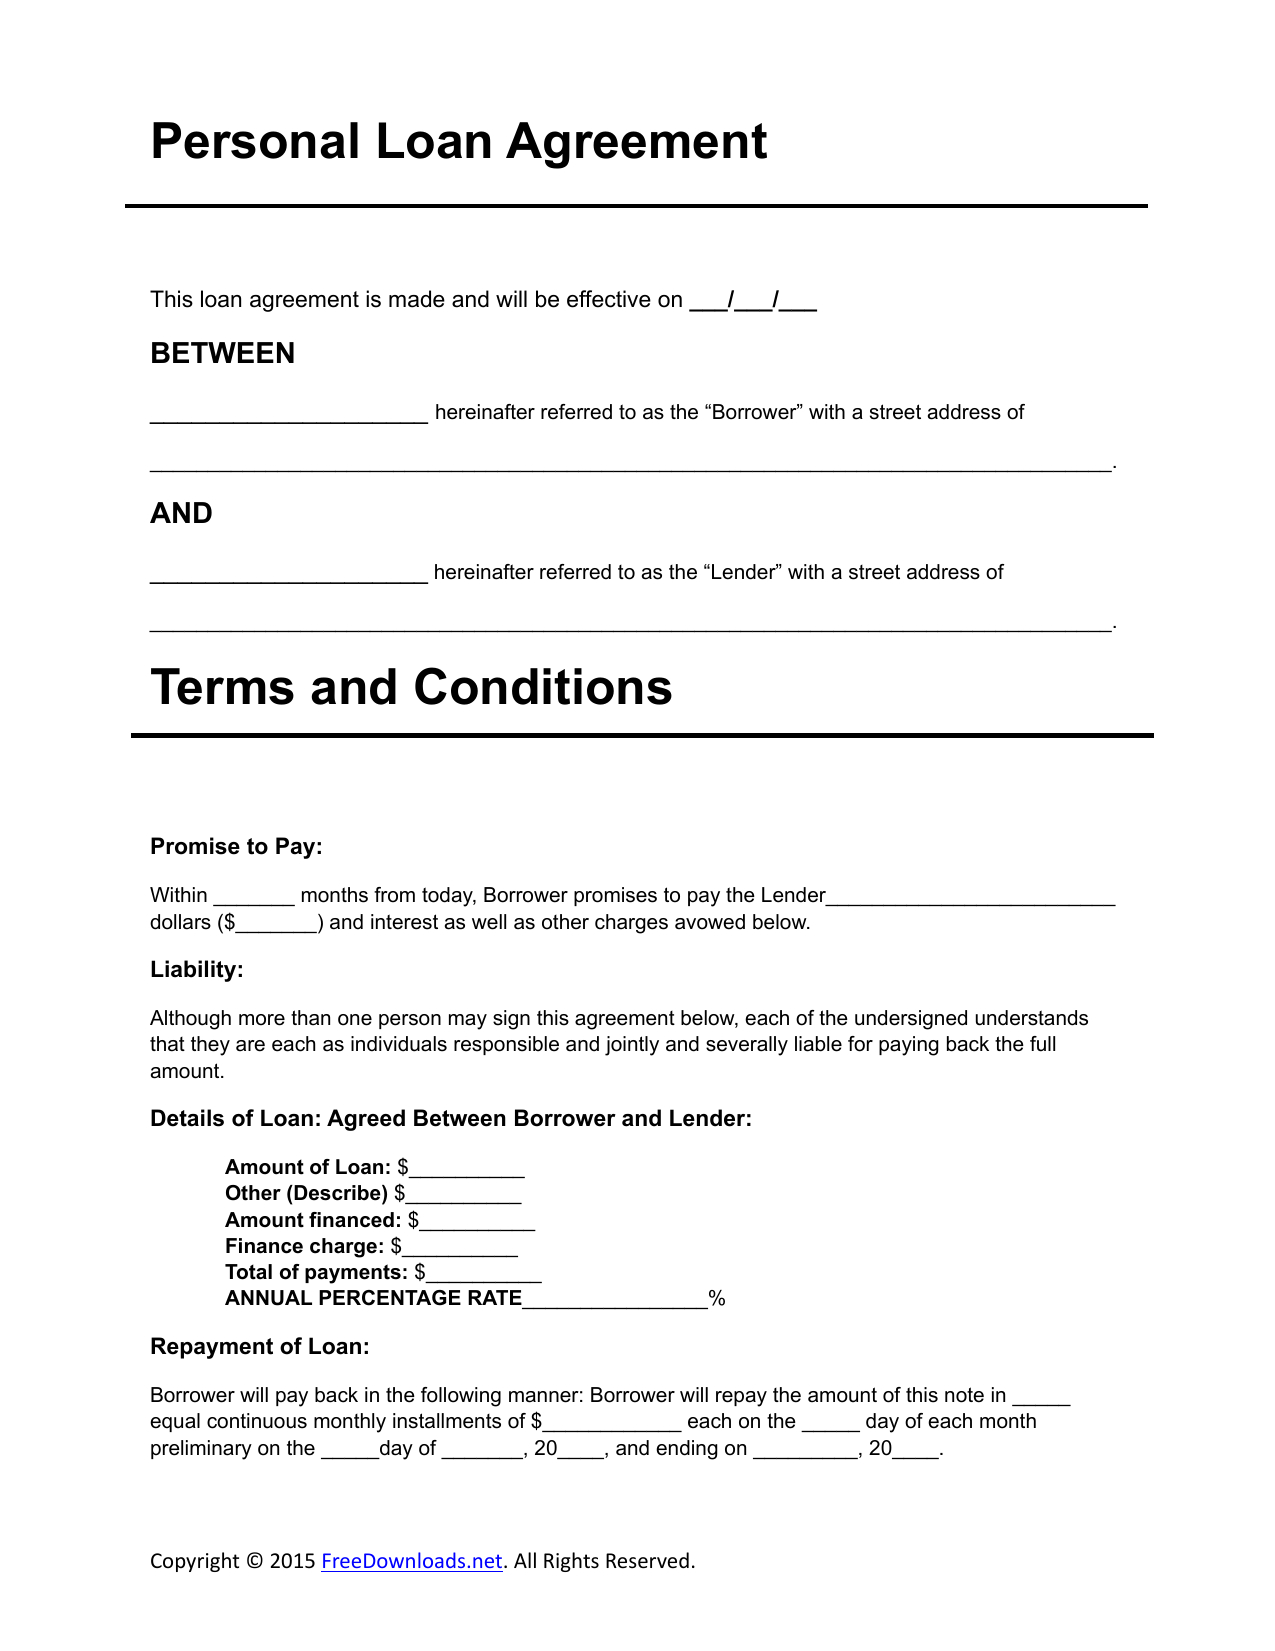 Download Personal Loan Agreement Template  Pdf  Rtf  Word in Private Loan Agreement Template Free